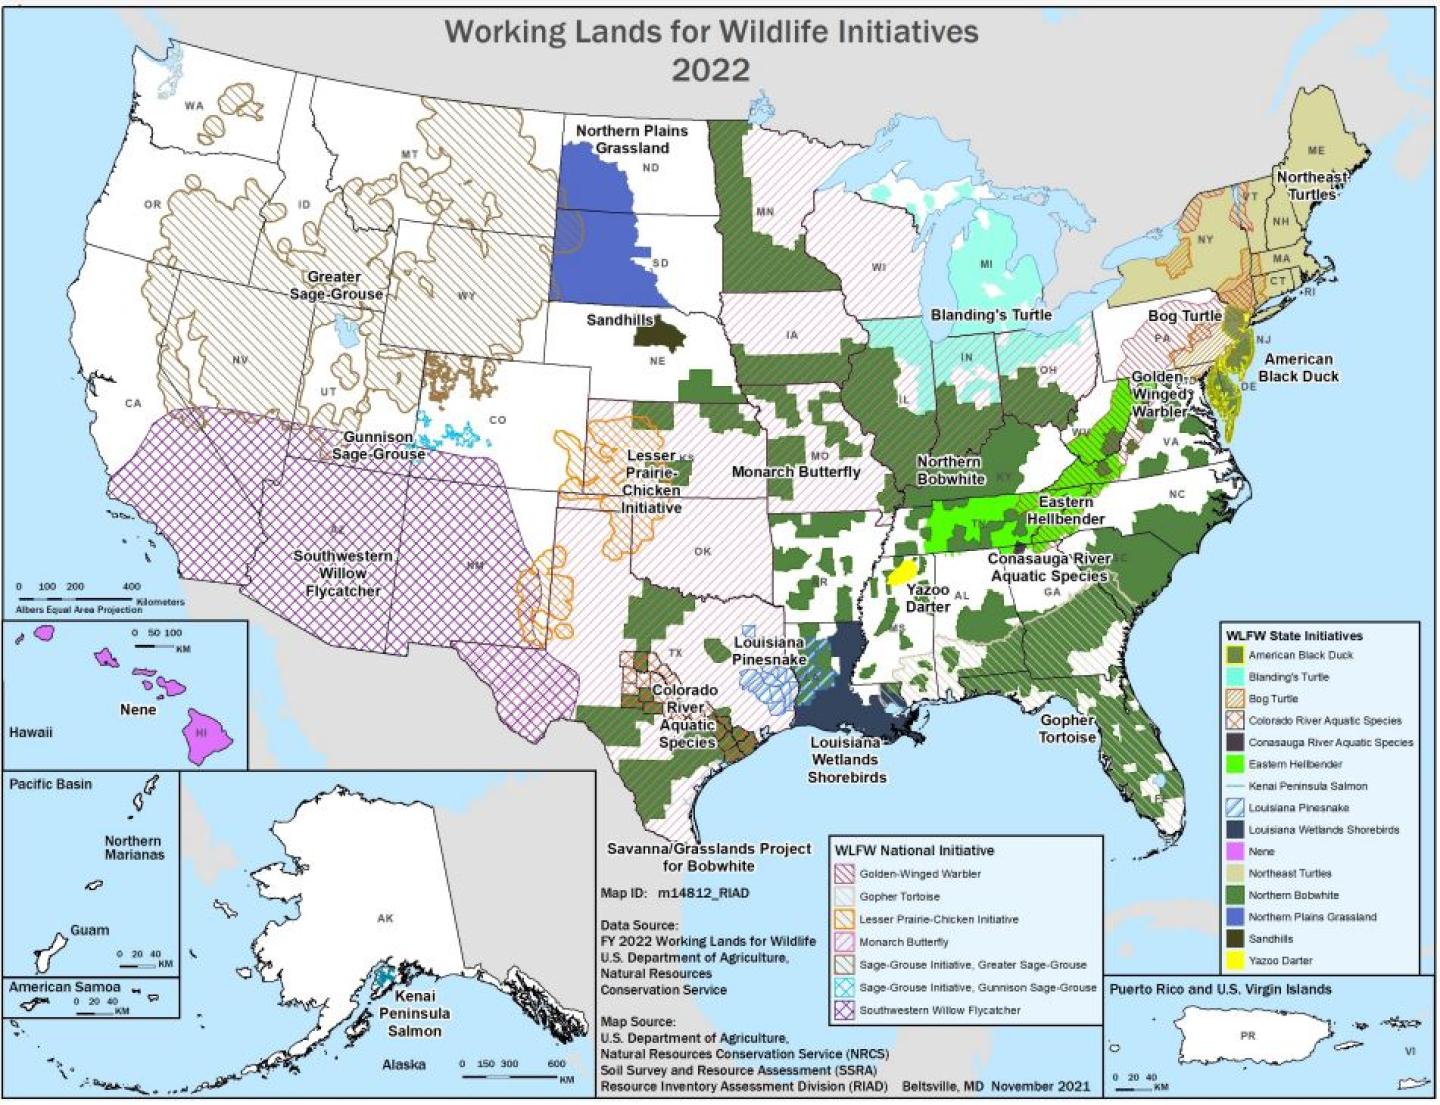 Working Lands for Wildlife Initiatives 2022 Map